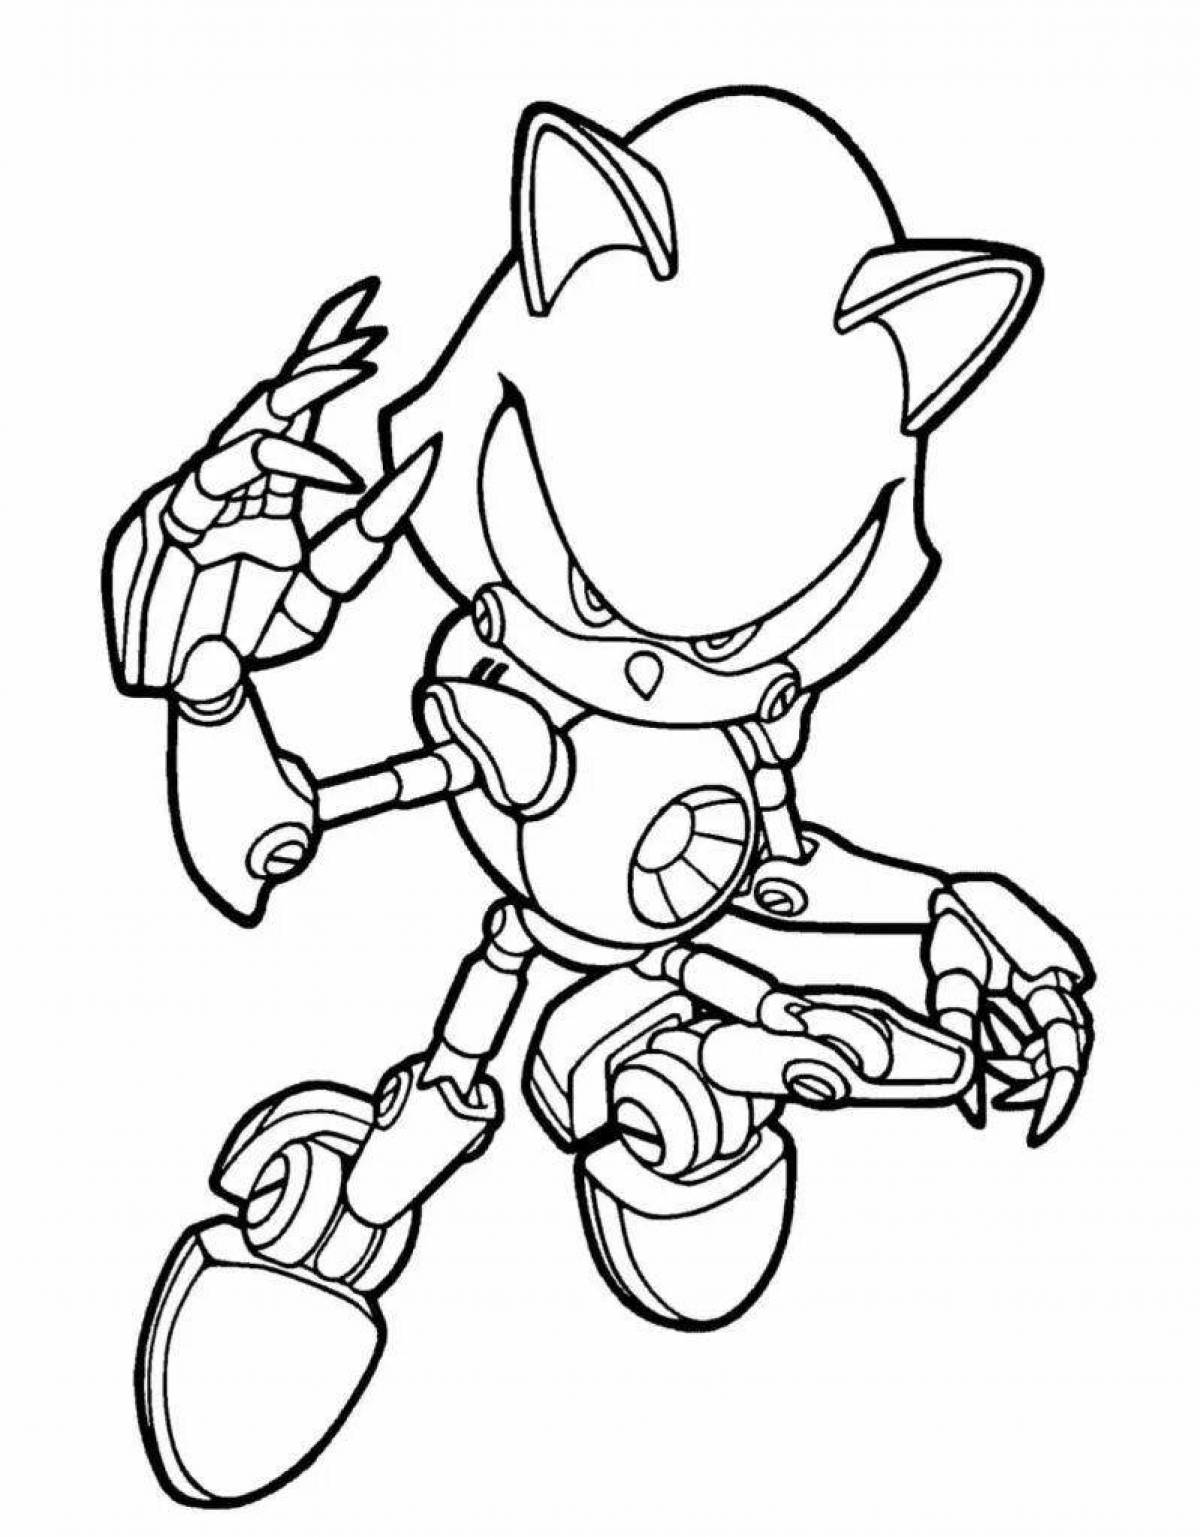 Sonic heroes vibrant coloring book